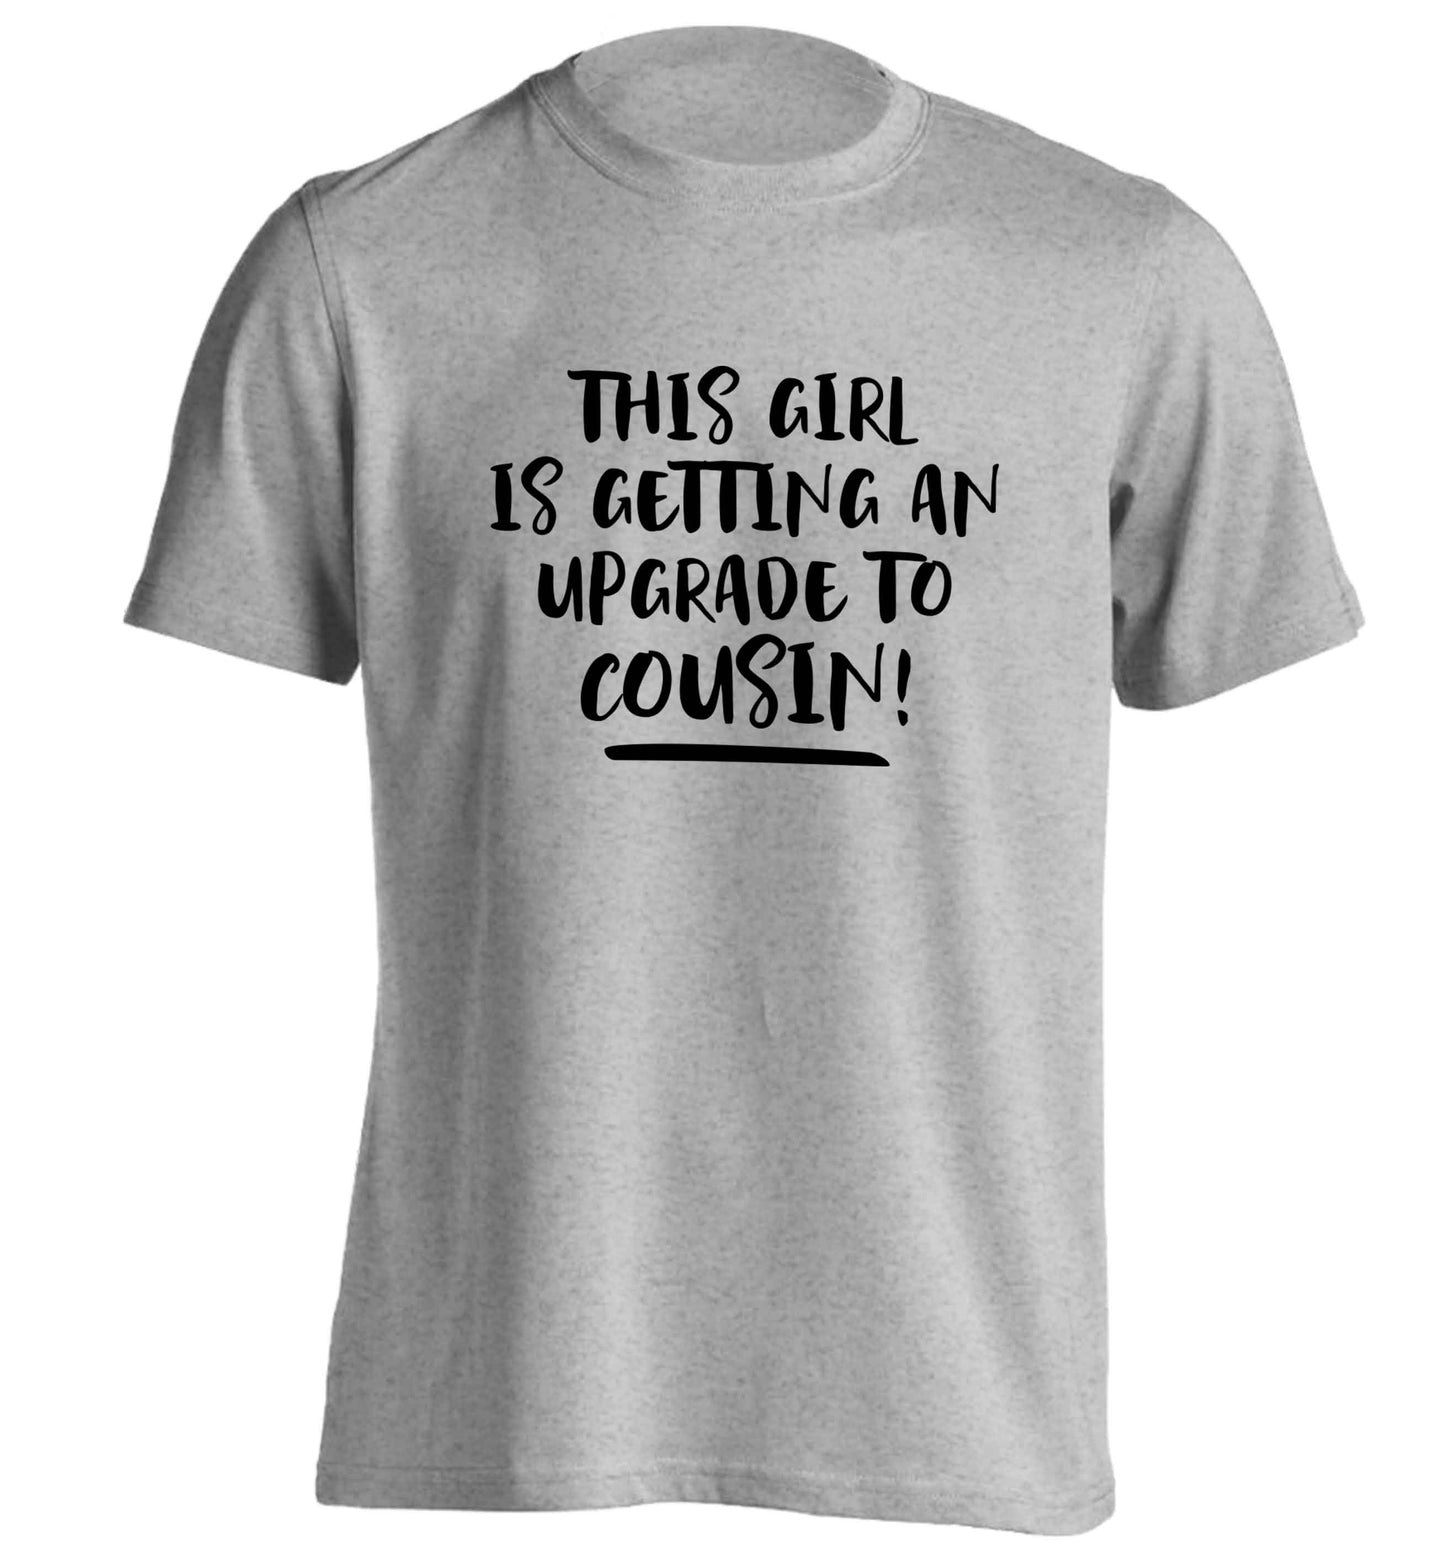 This girl is getting an upgrade to cousin! adults unisex grey Tshirt 2XL